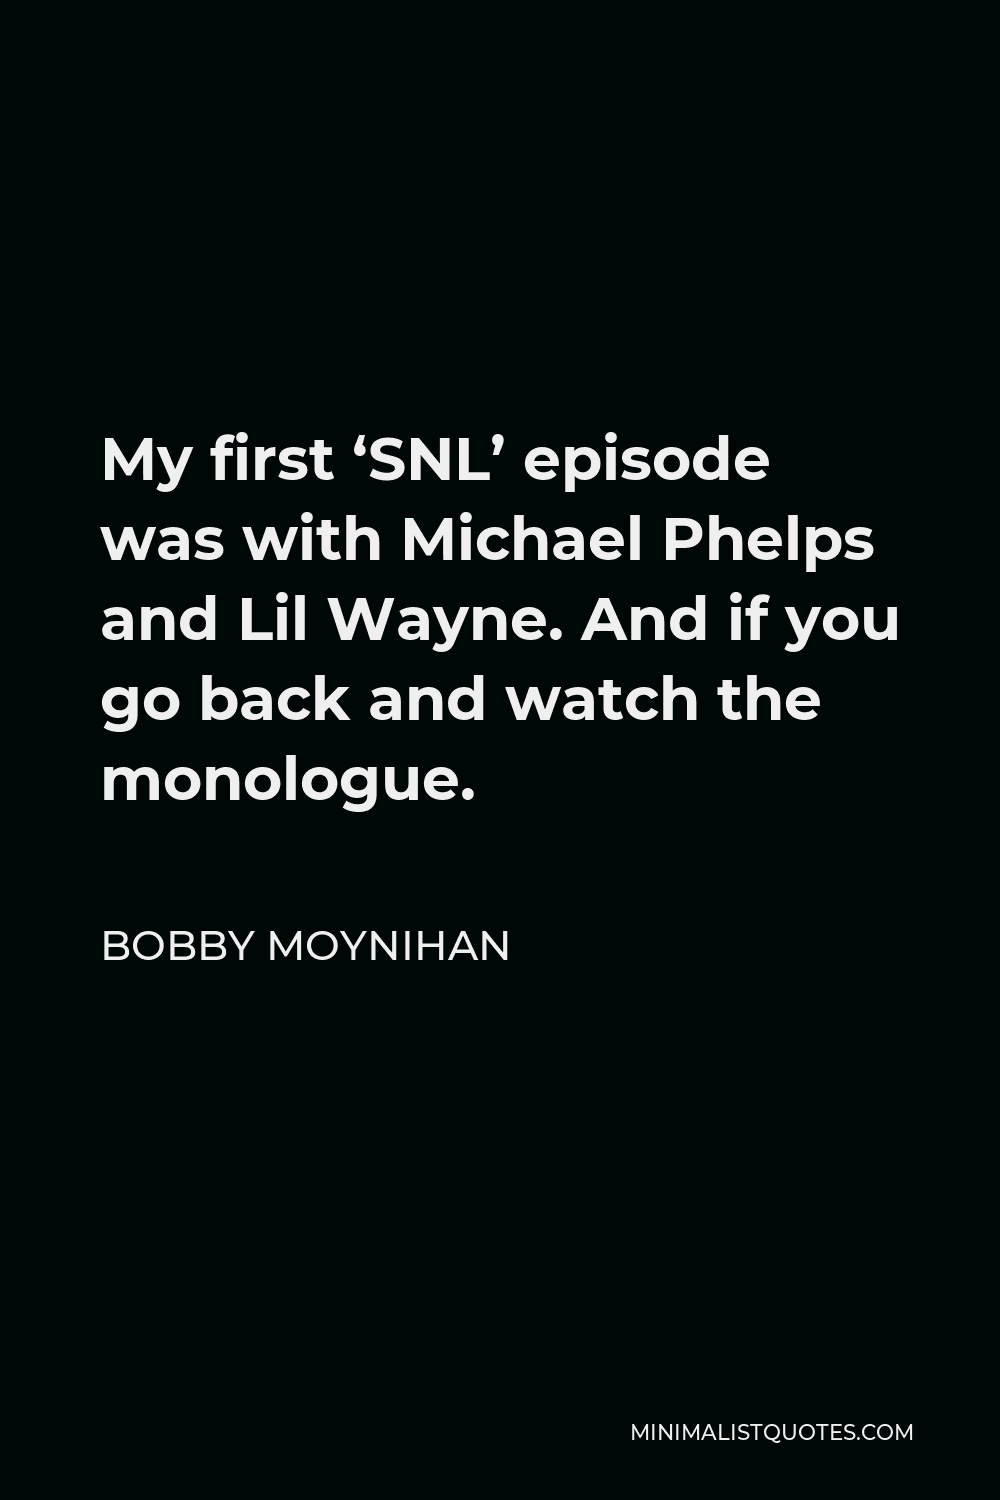 Bobby Moynihan Quote - My first ‘SNL’ episode was with Michael Phelps and Lil Wayne. And if you go back and watch the monologue.